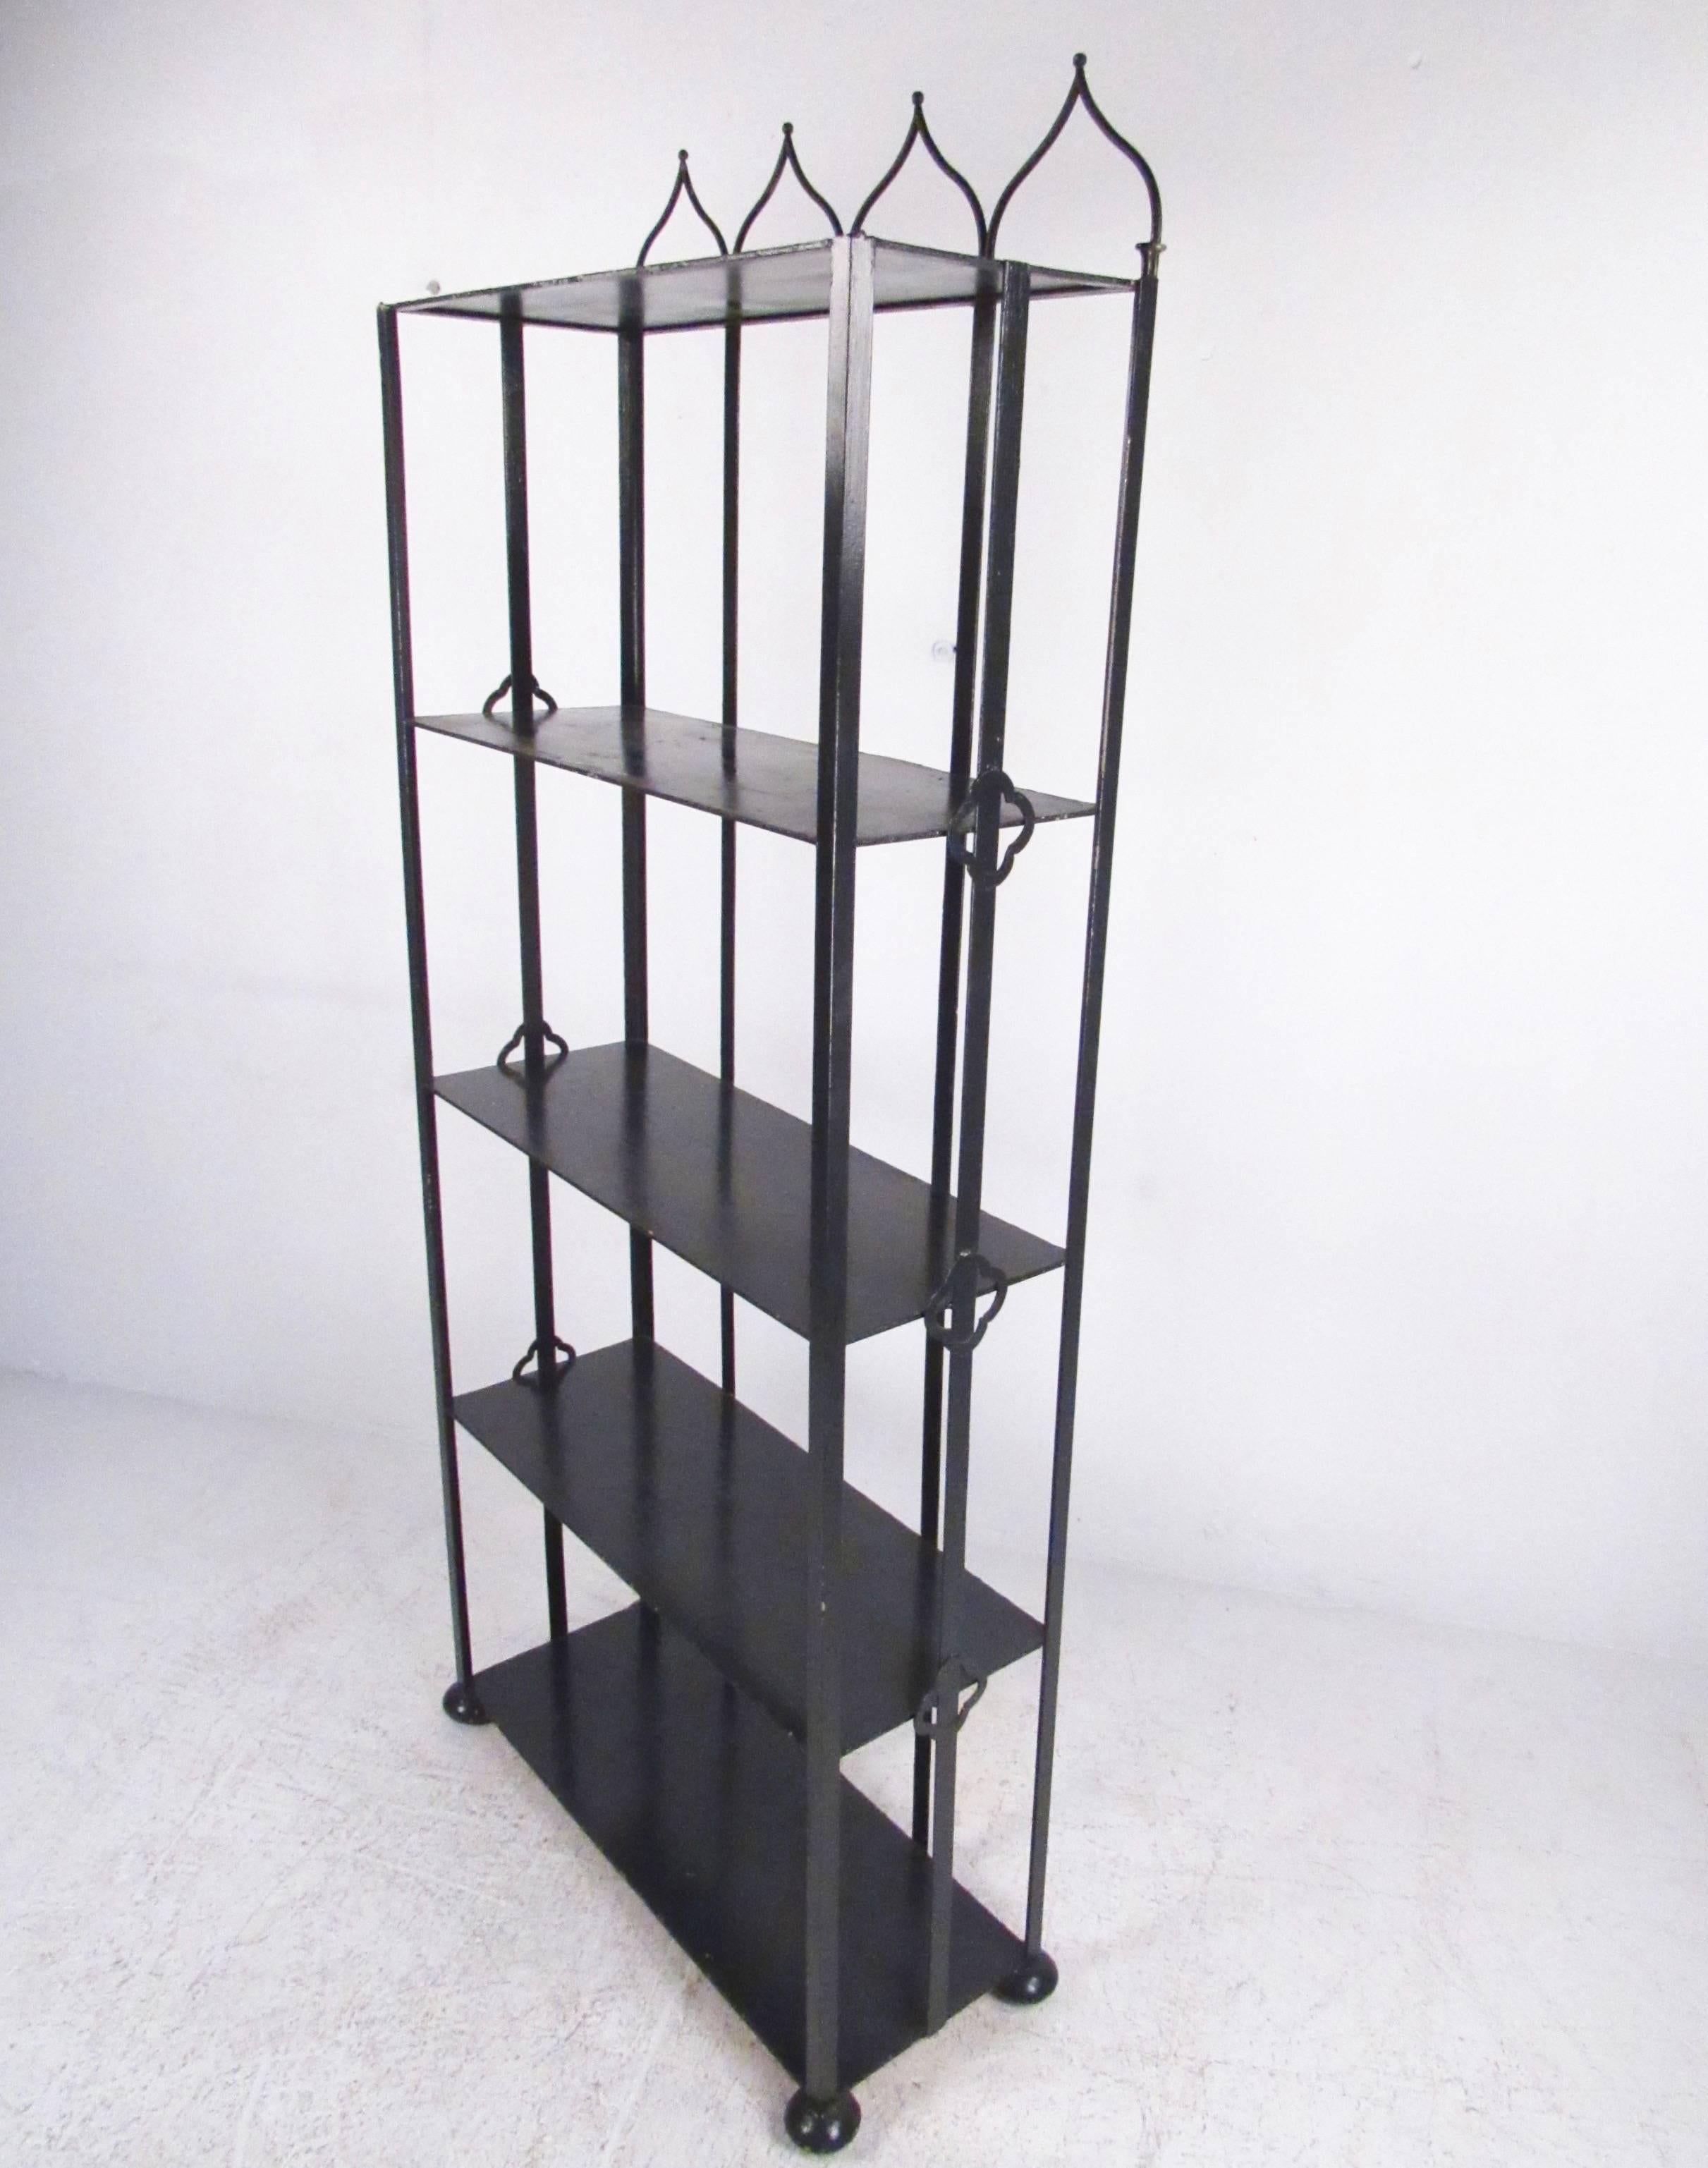 This tall and stylish metal bookshelf features ornate pointed top and decorative trim and feet. Four spacious shelves for display or storage use, this vintage Industrial book case makes a unique addition to any interior. Please confirm item location